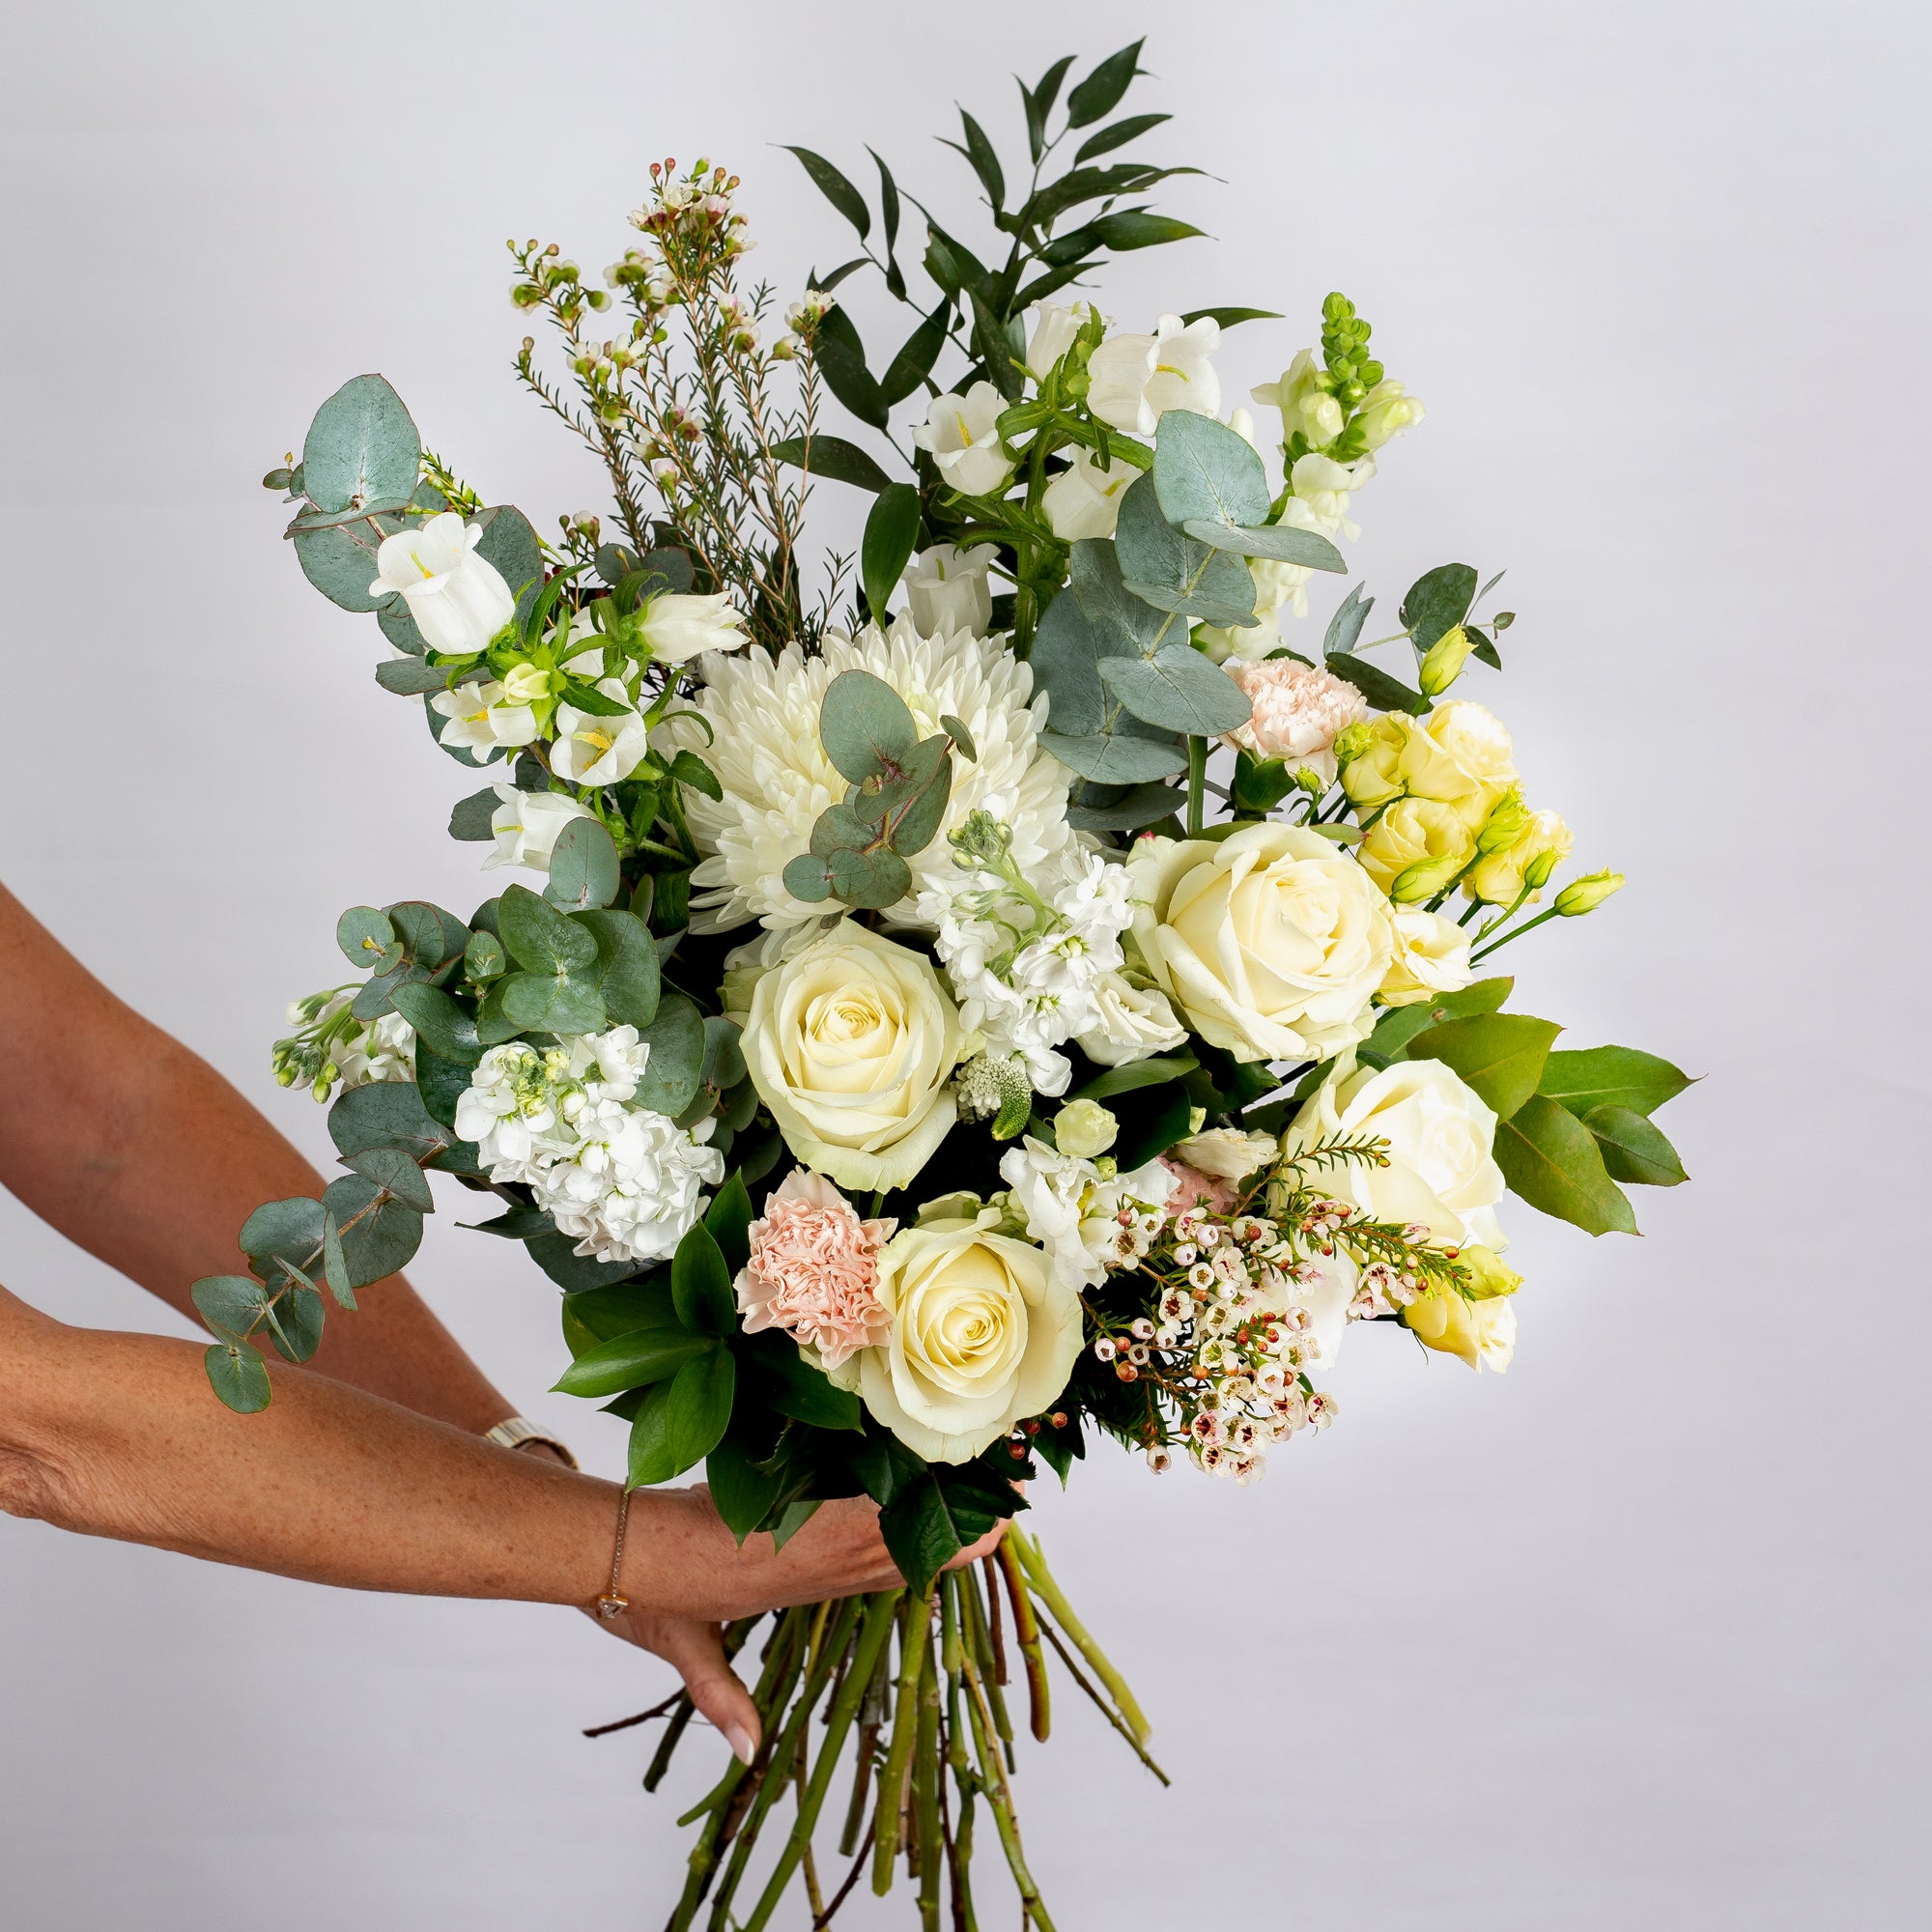 The Benefits of a Flower Subscription Service